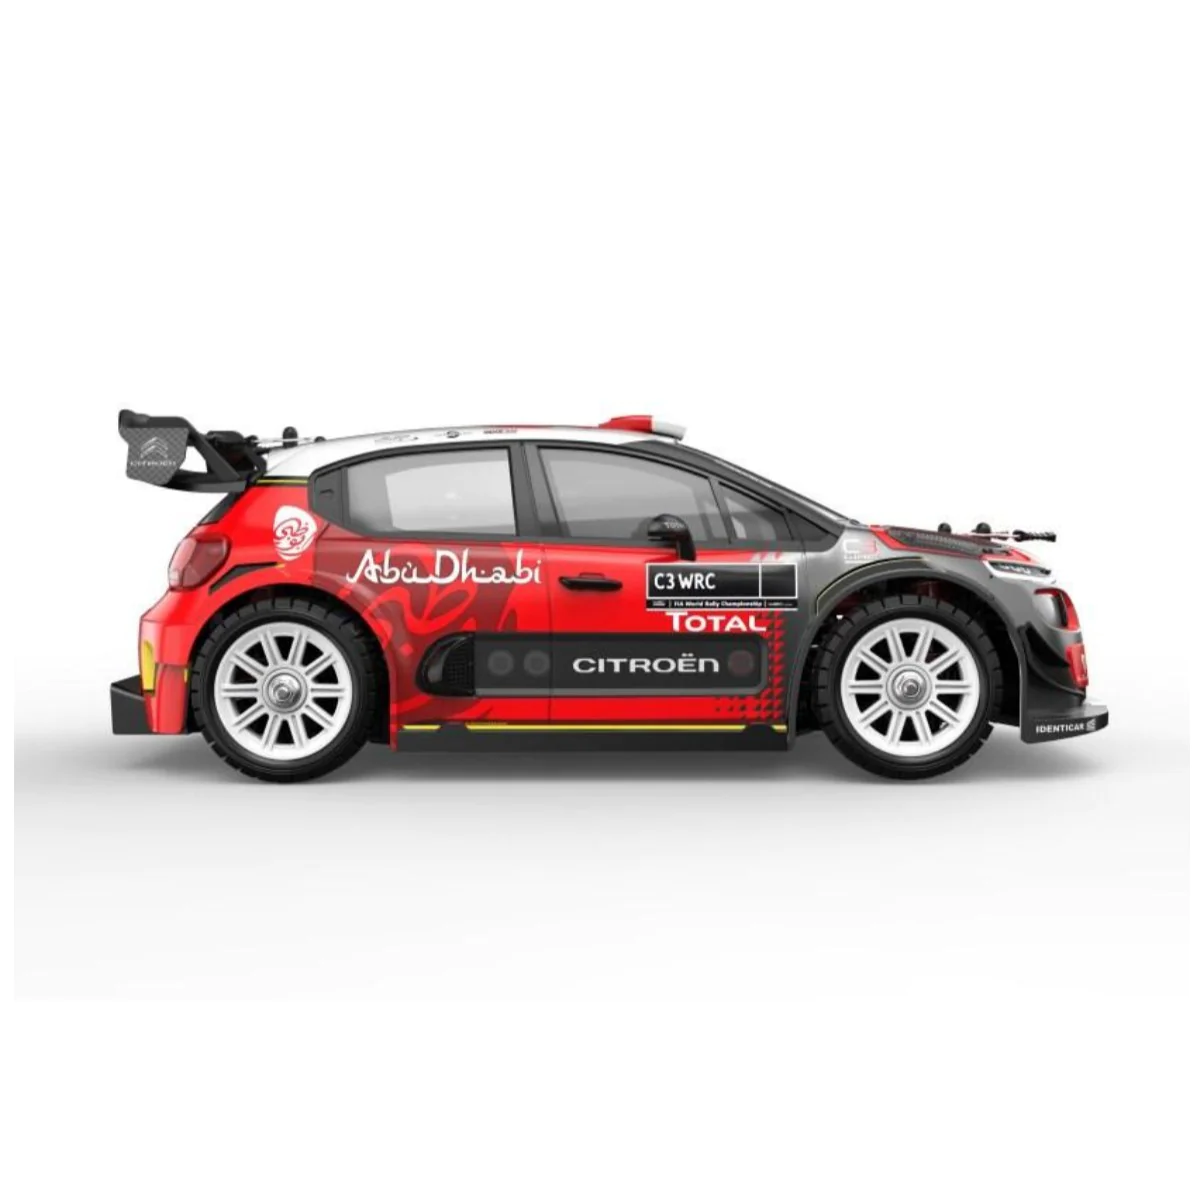 MJX Hyper Go 14303 Citroen RC Rally - High-Speed Brushless RC Car, 1/14 Scale 4WD Off-Road Racing